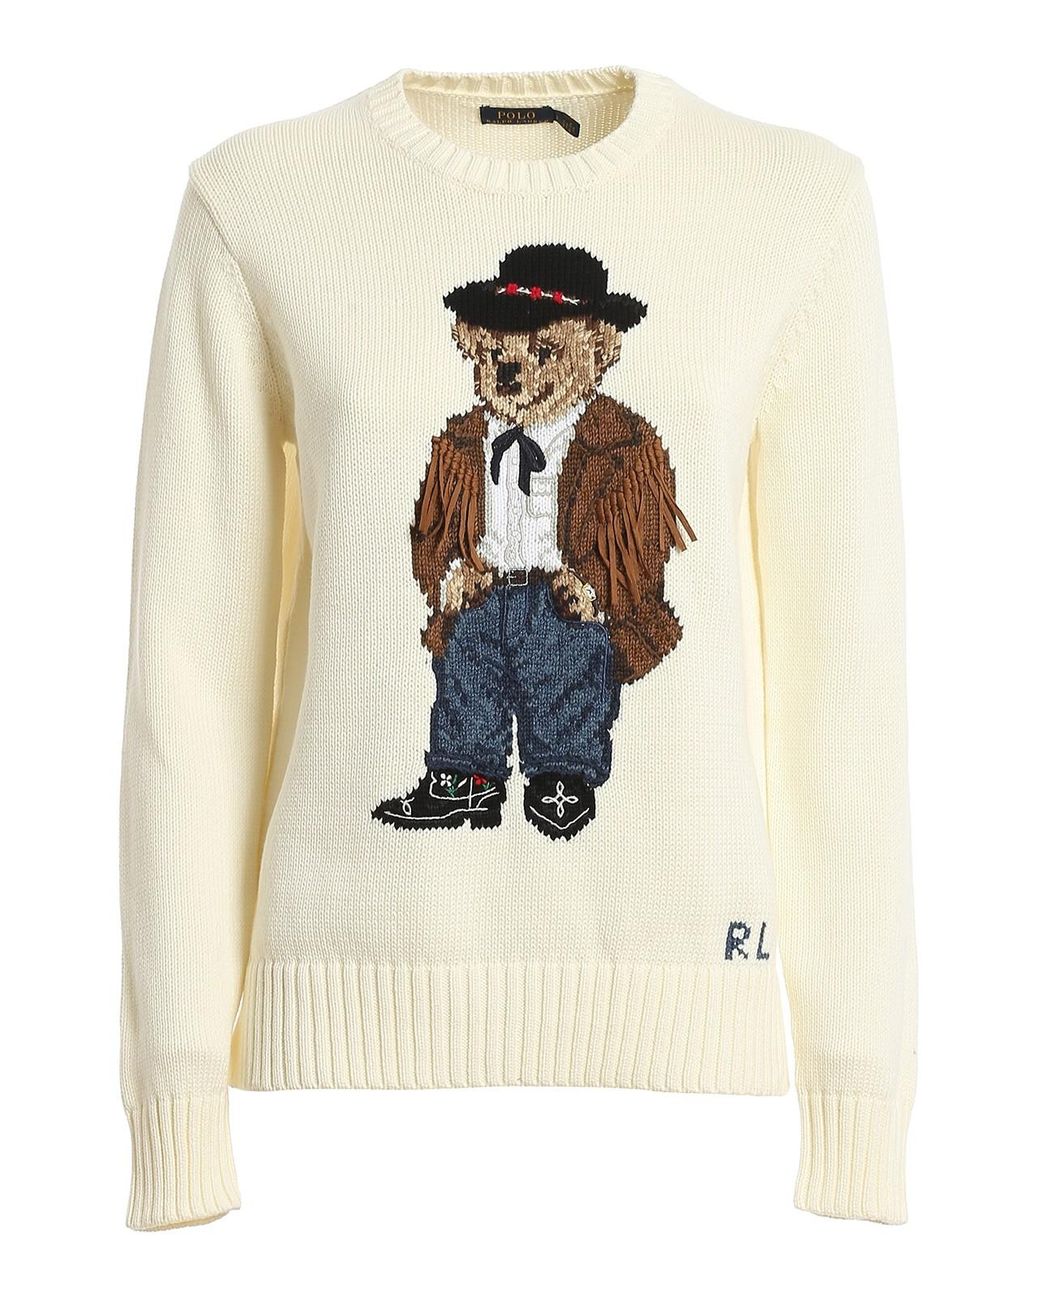 Polo Ralph Lauren Polo Bear Embroidery Sweater in Cream (Natural) - Lyst